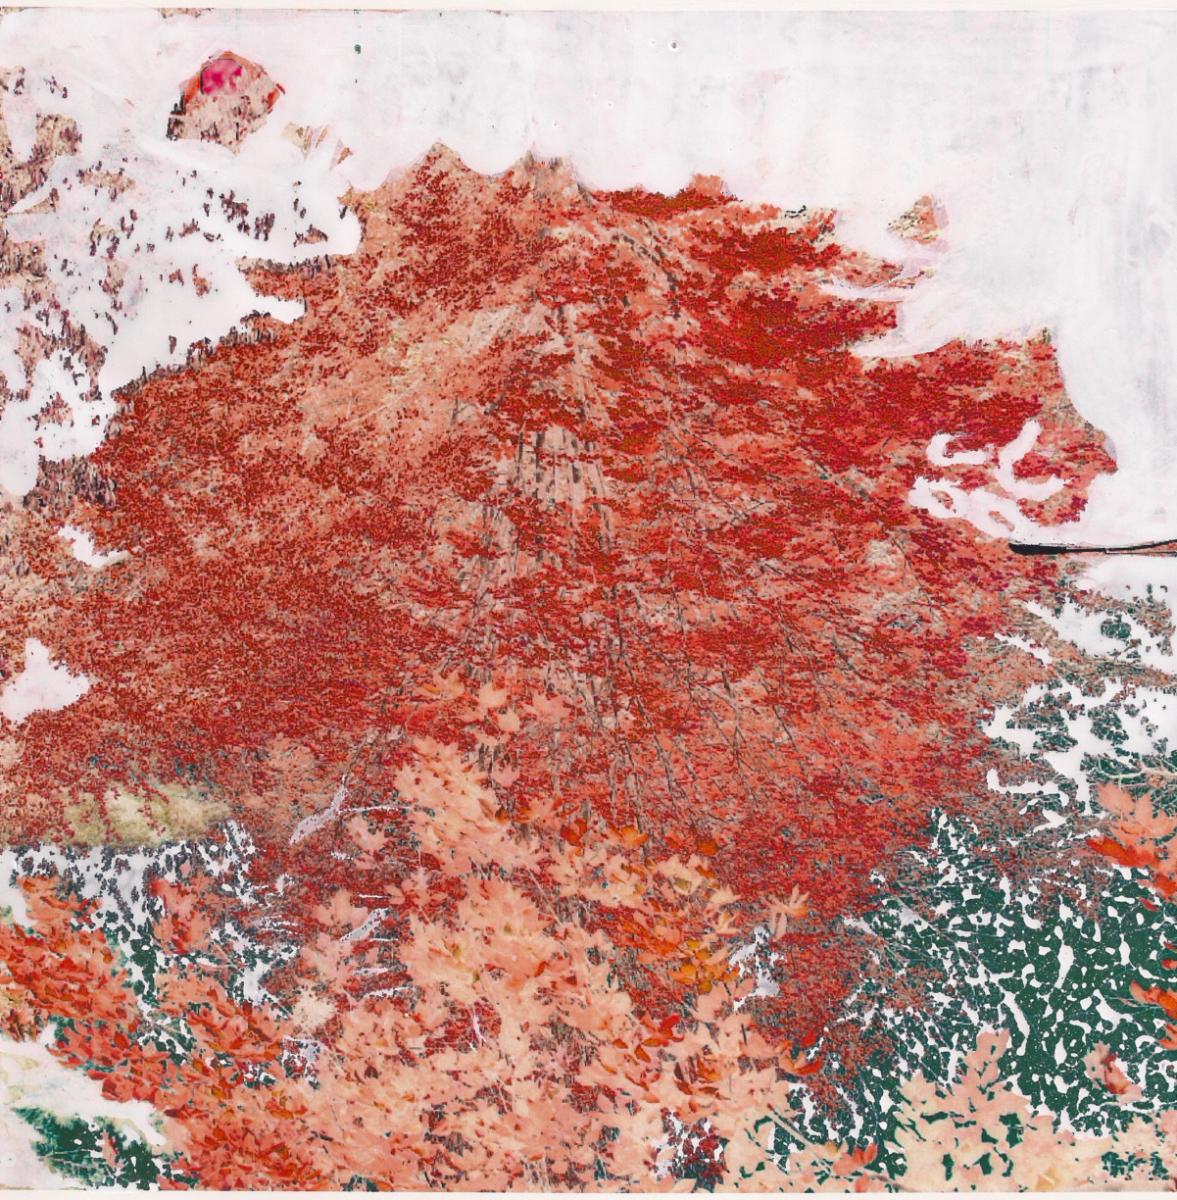 Ava Blitz Landscape Painting - Burning (Red) Bush: original abstract landscape painting on color photograph